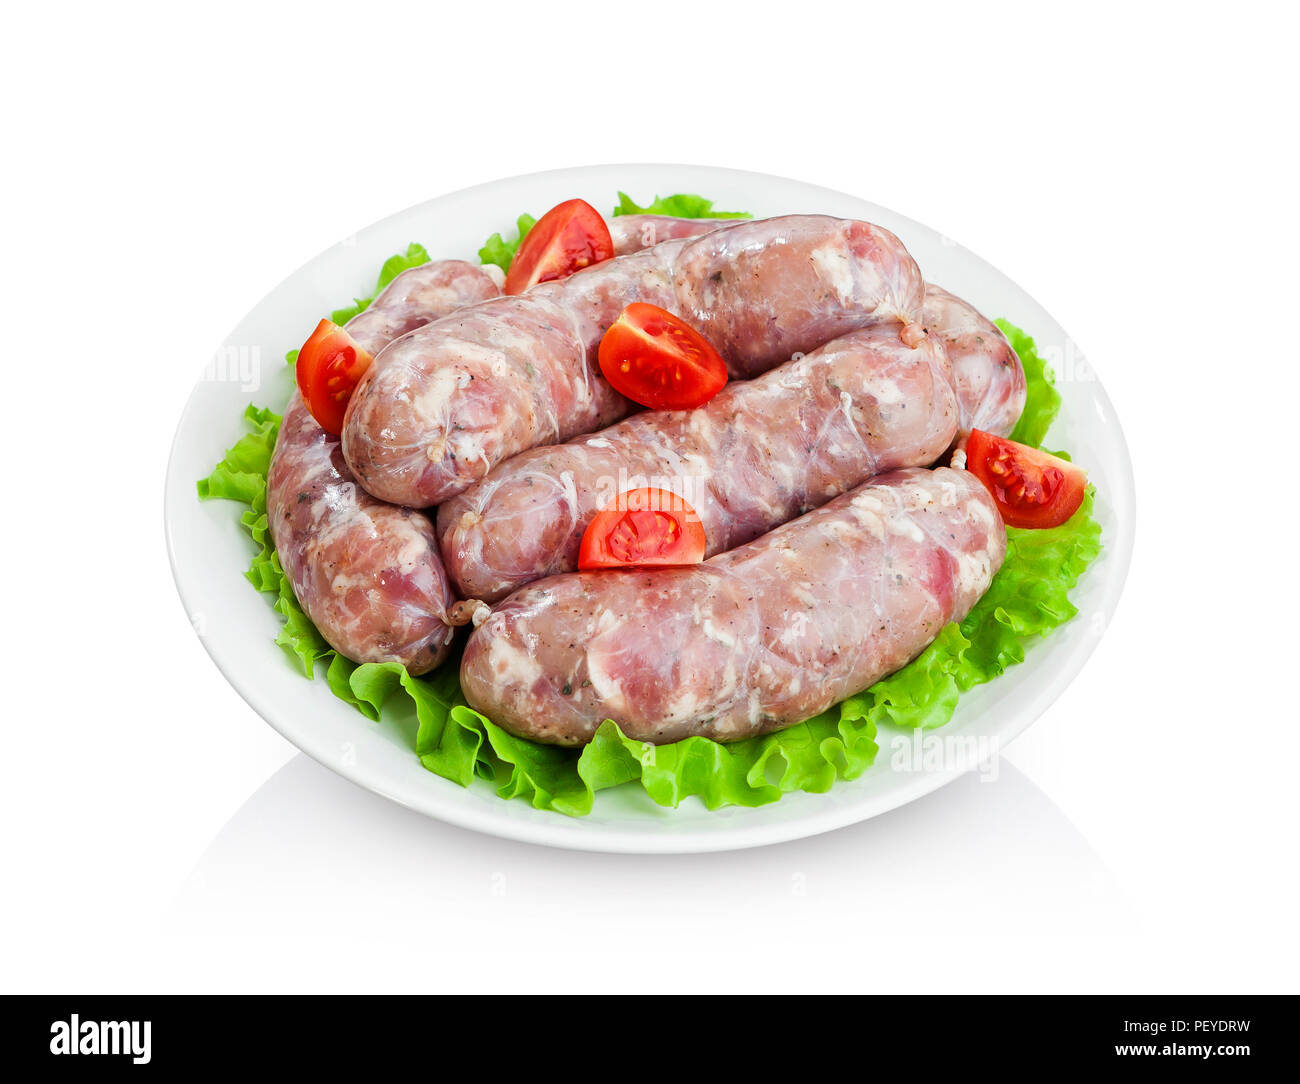 Sausages raw for grilling on plate with lettuce and cherry tomatoes isolated on white background Stock Photo